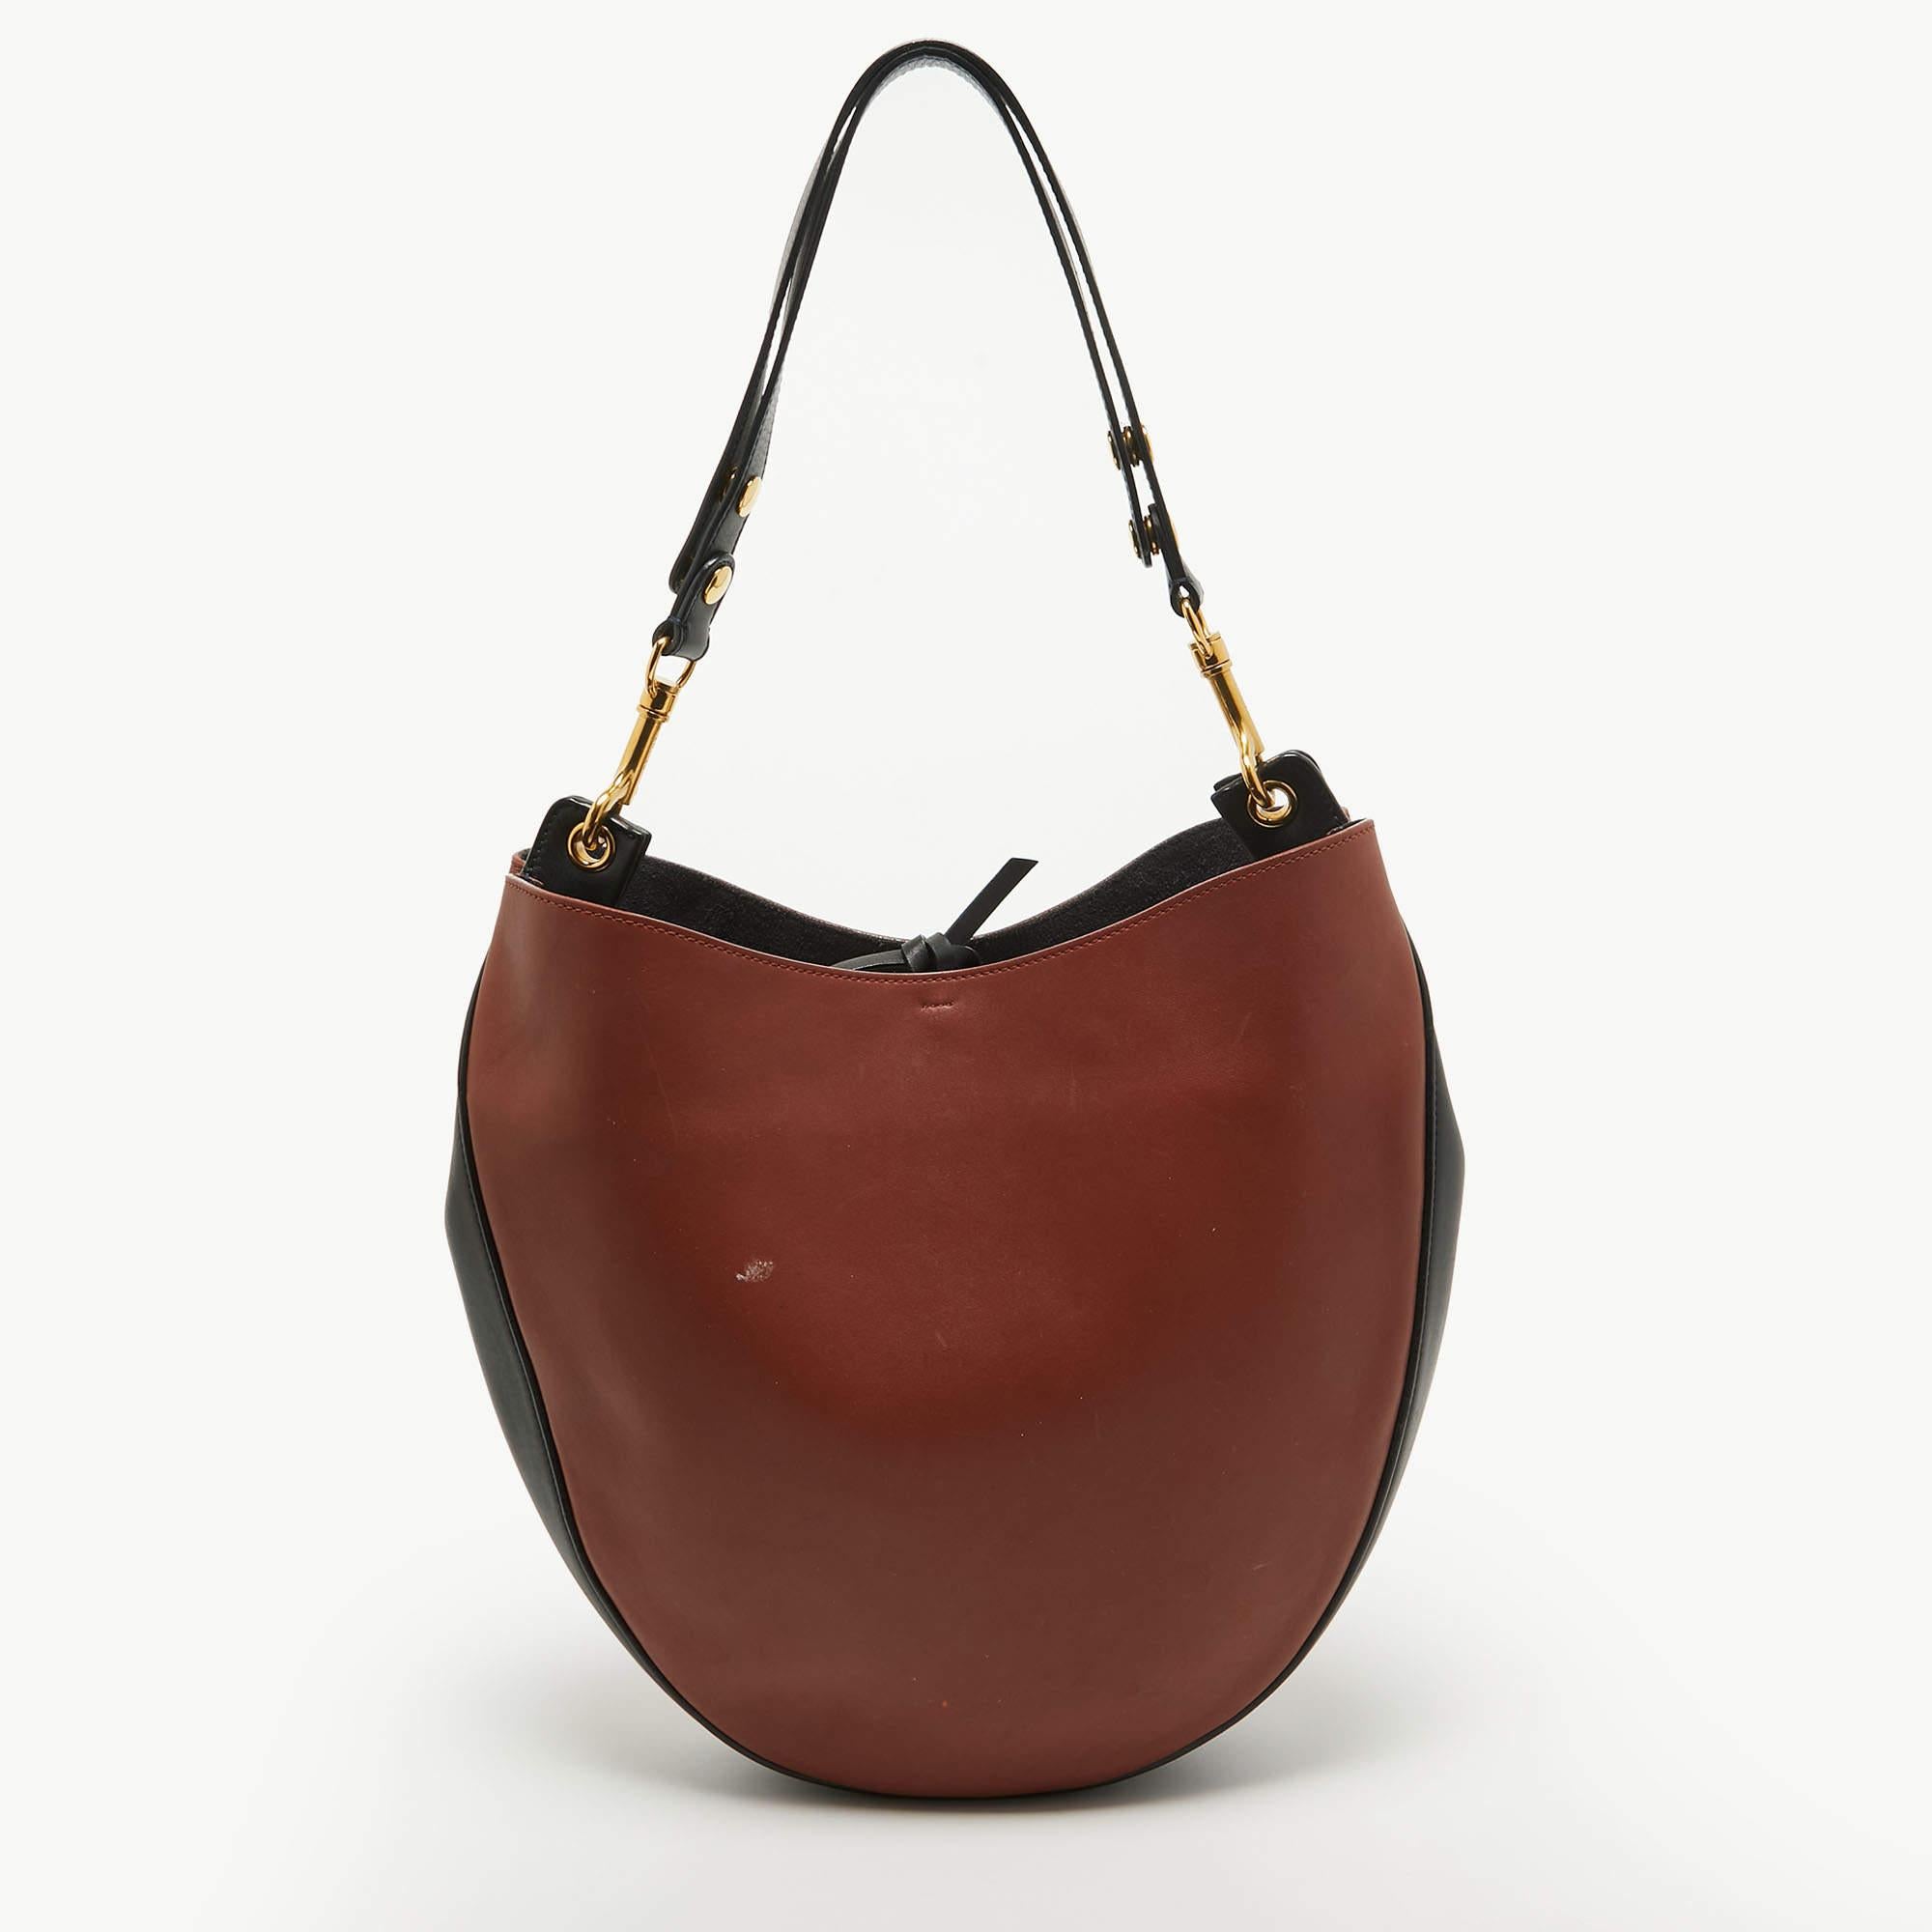 Stylish handbags never fail to make a fashionable impression. Make this designer hobo yours by pairing it with your sophisticated workwear as well as playful casual looks.

